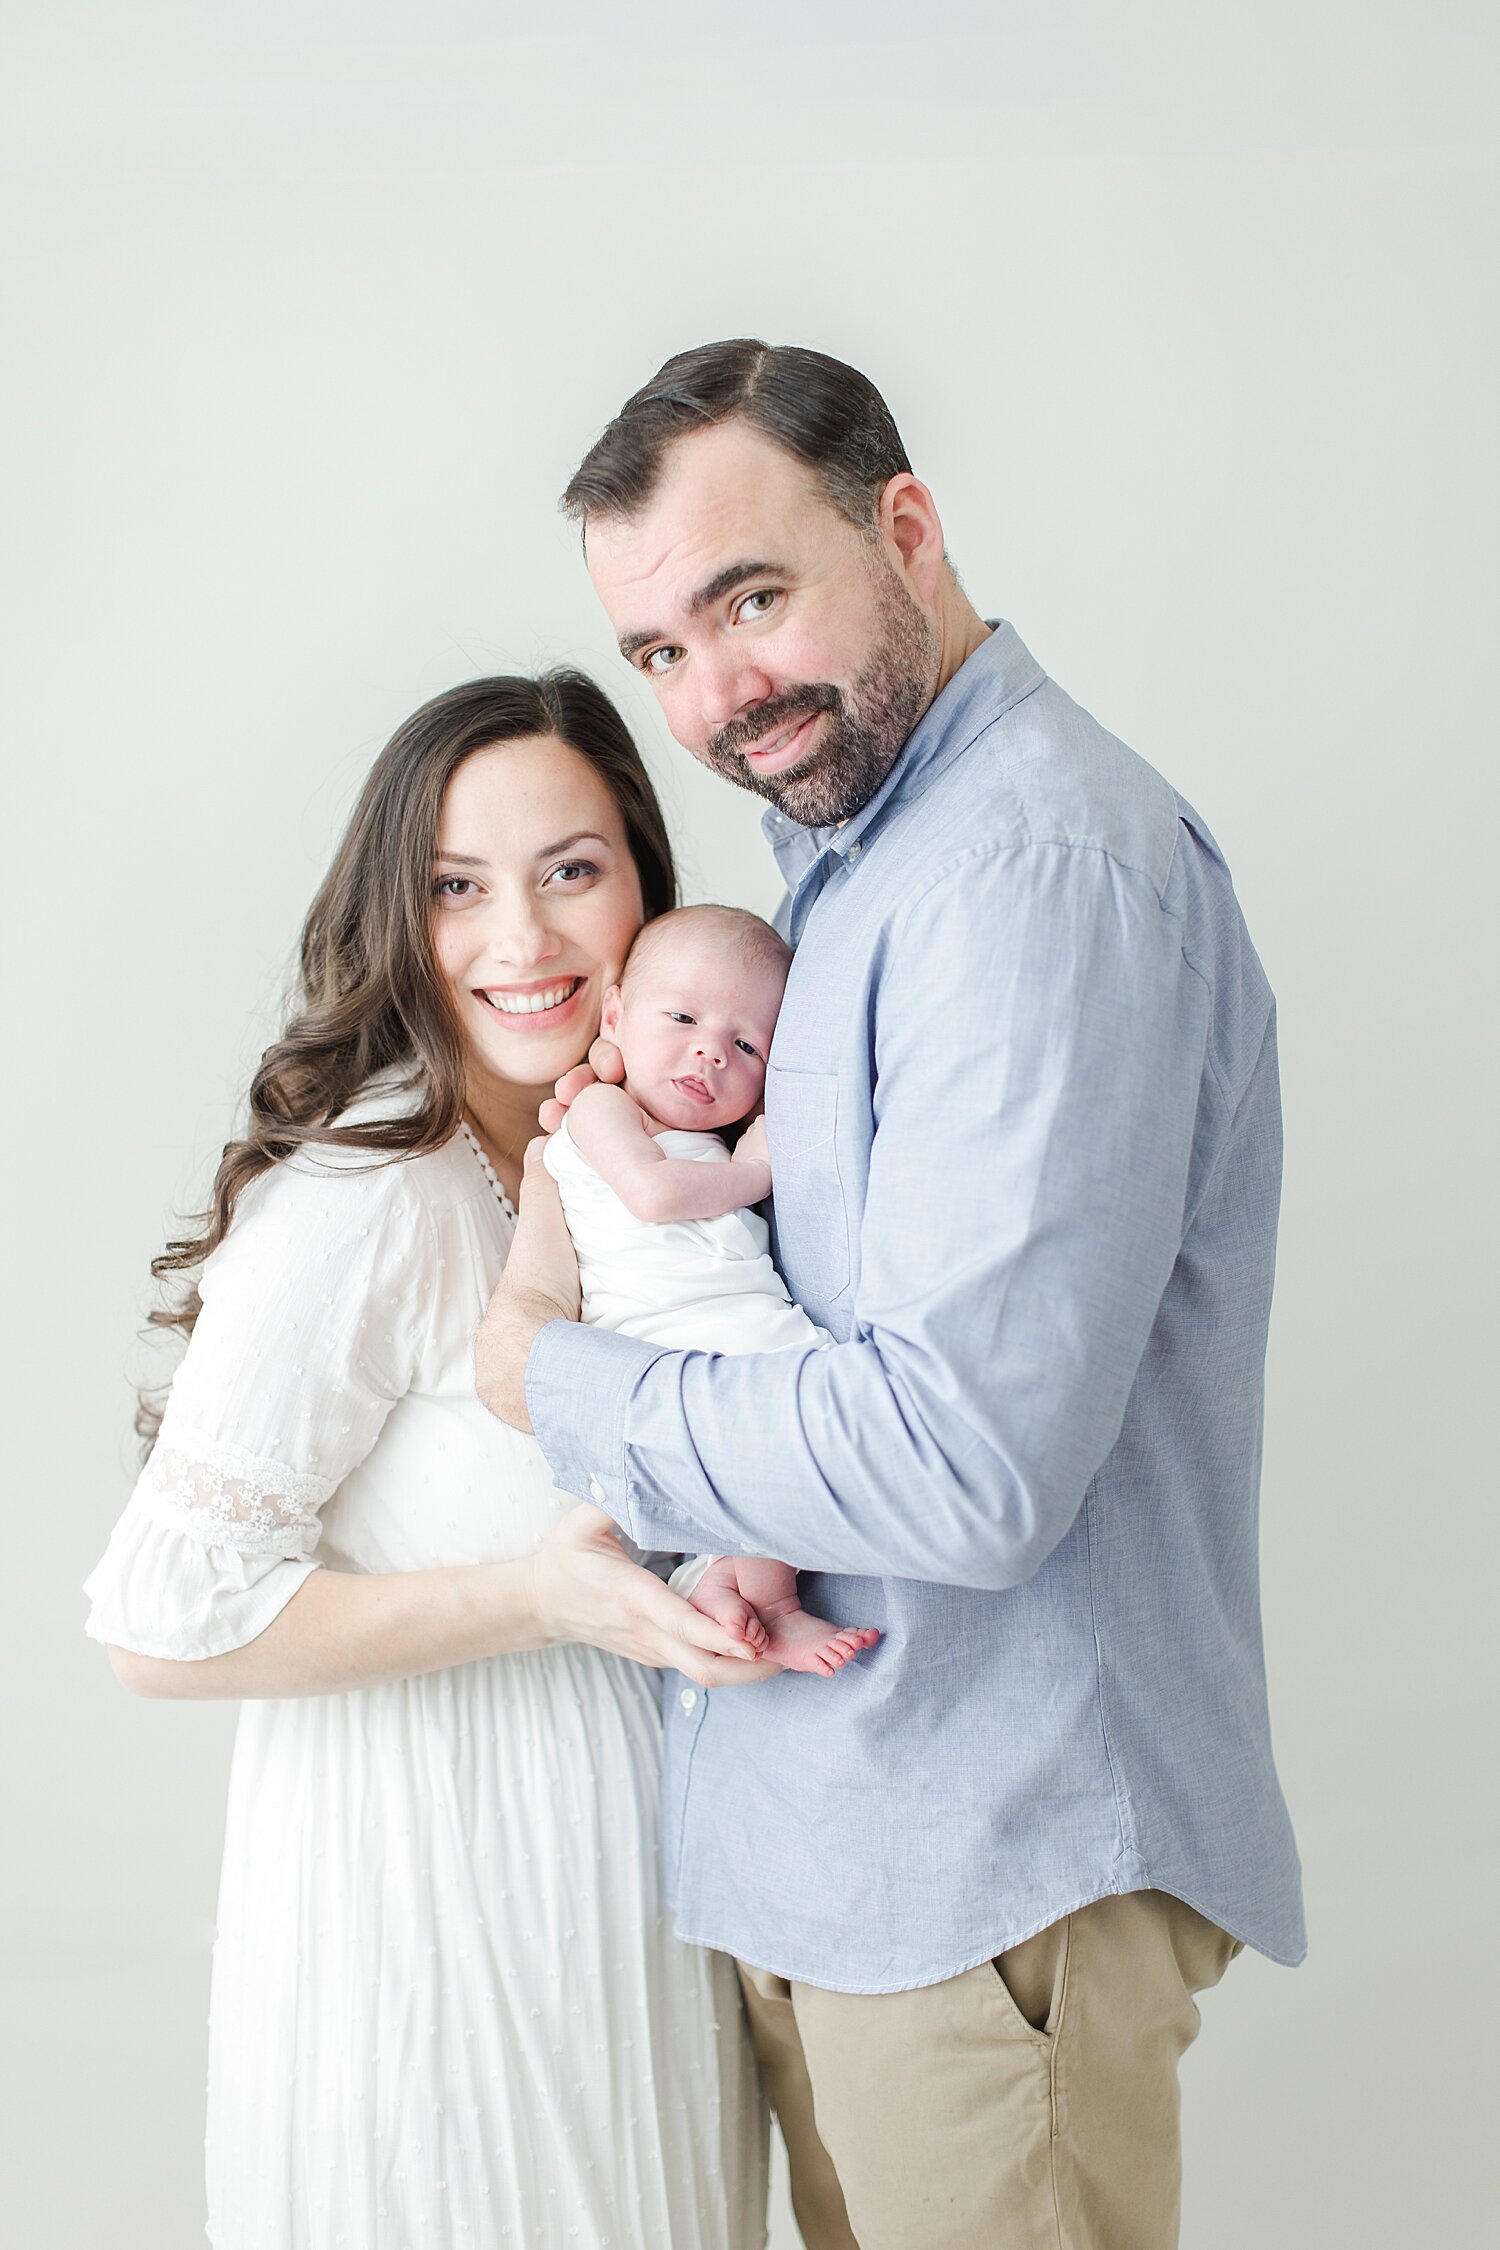 Family portrait during newborn session in studio in Fairfield County, CT. Photo by Kristin Wood Photography.